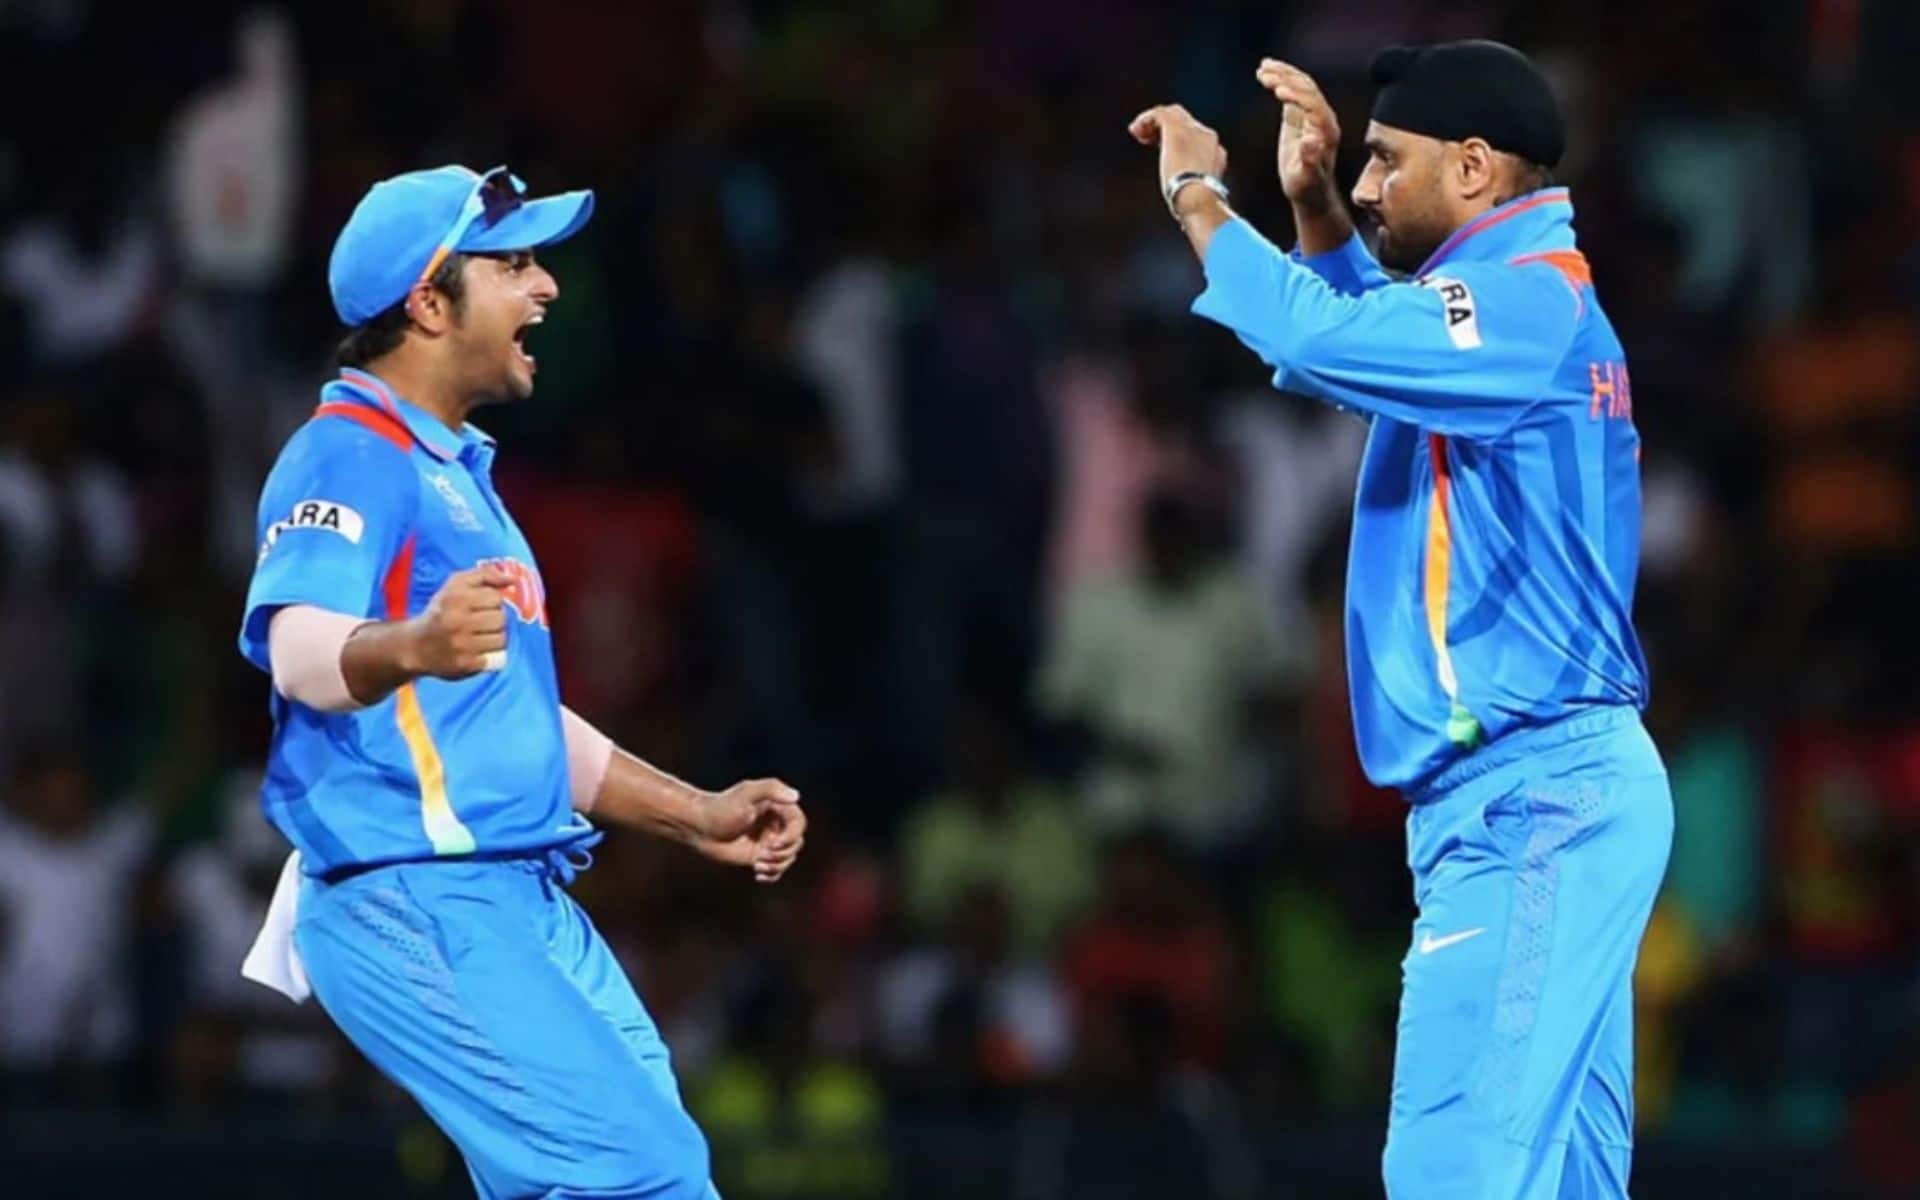 Harbhajan Singh celebrating an English wicket in the 2012 T20 World Cup (x.com)